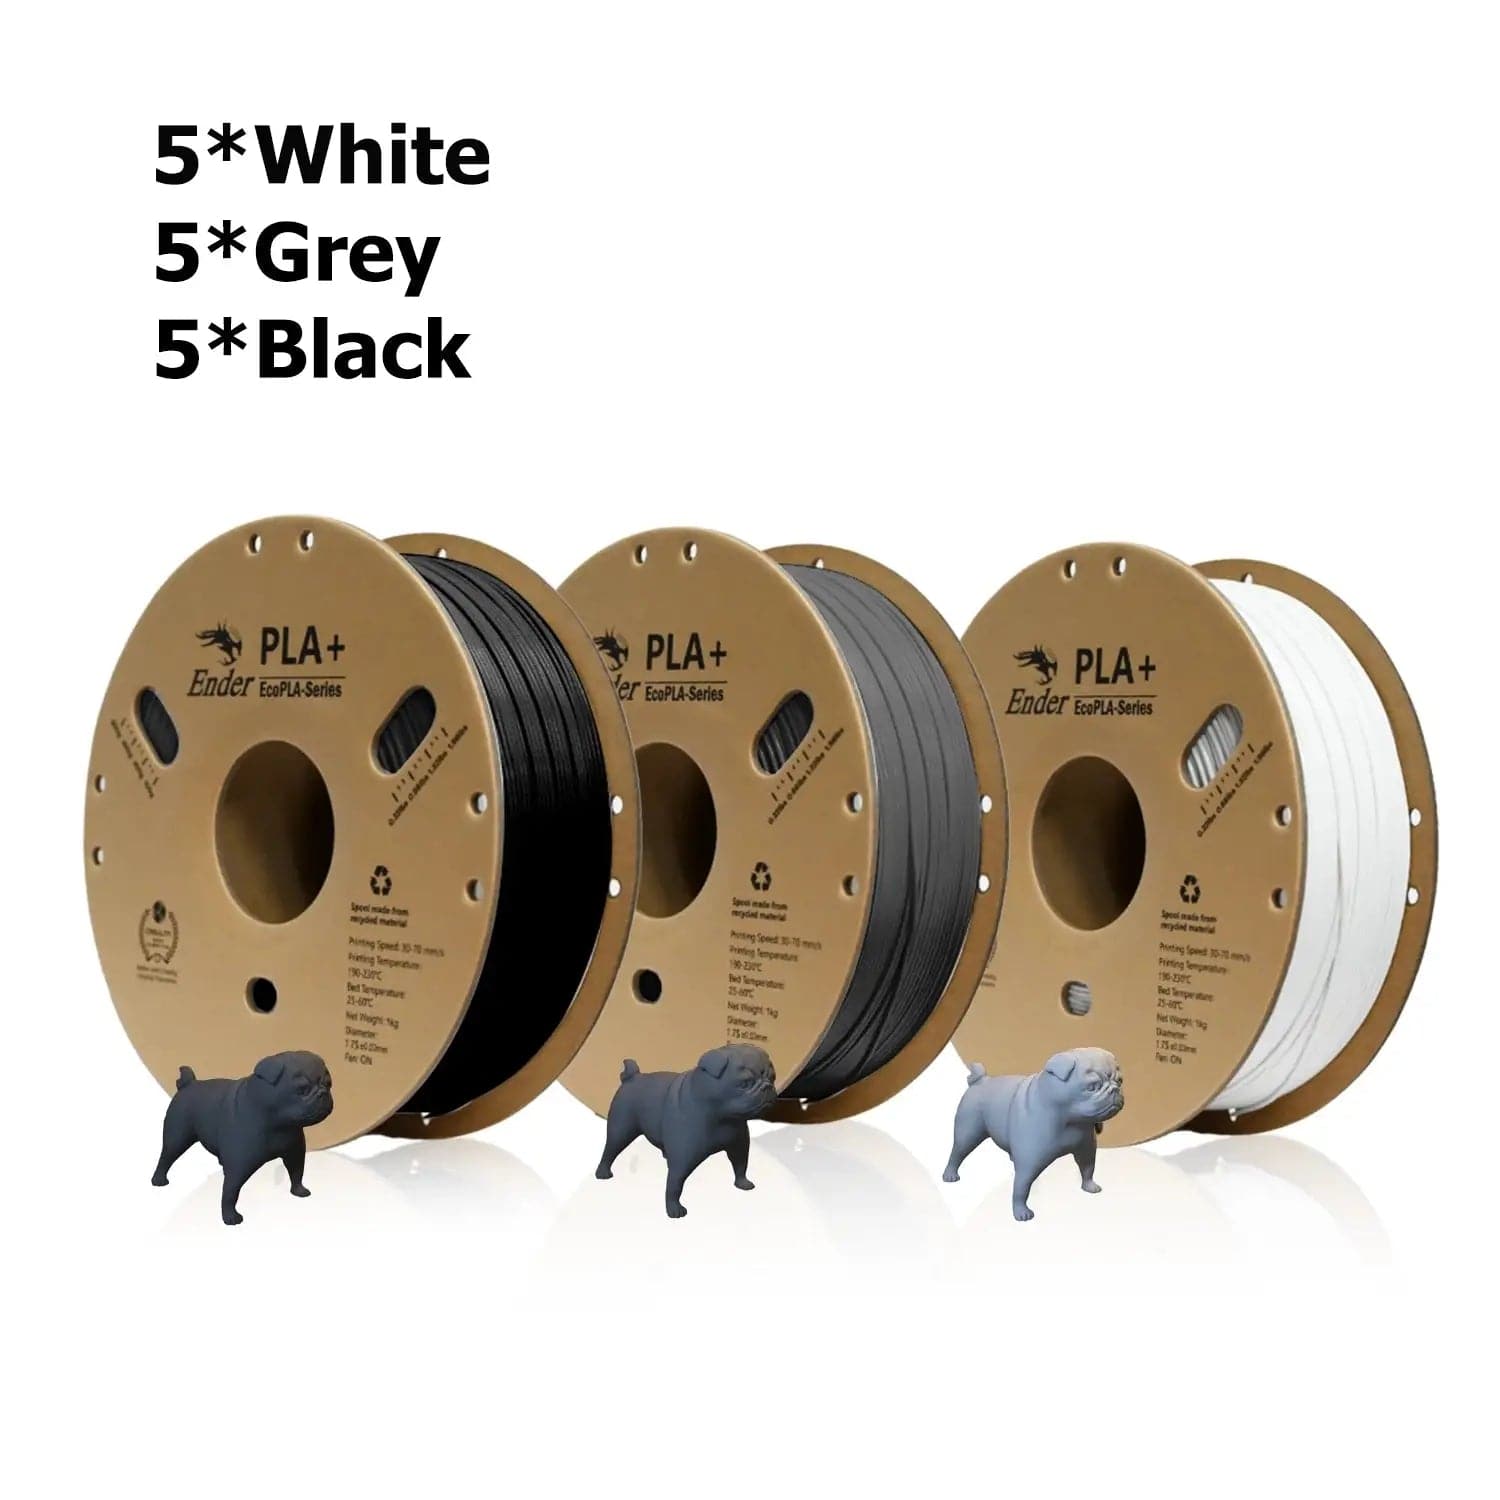 Over 10kg Filament Combo-Creality Ender PLA+ 1.75mm 1KG Filament
【Ship From Amazon FBA Warehouse】Same shipping service with Amazon. Enjoy reliable performance and fast shipping with the Amazon FBA Warehouse.
【Creality Quality Ass10kg Filament Combo-Creality Ender PLA+ 13D Printing Materials